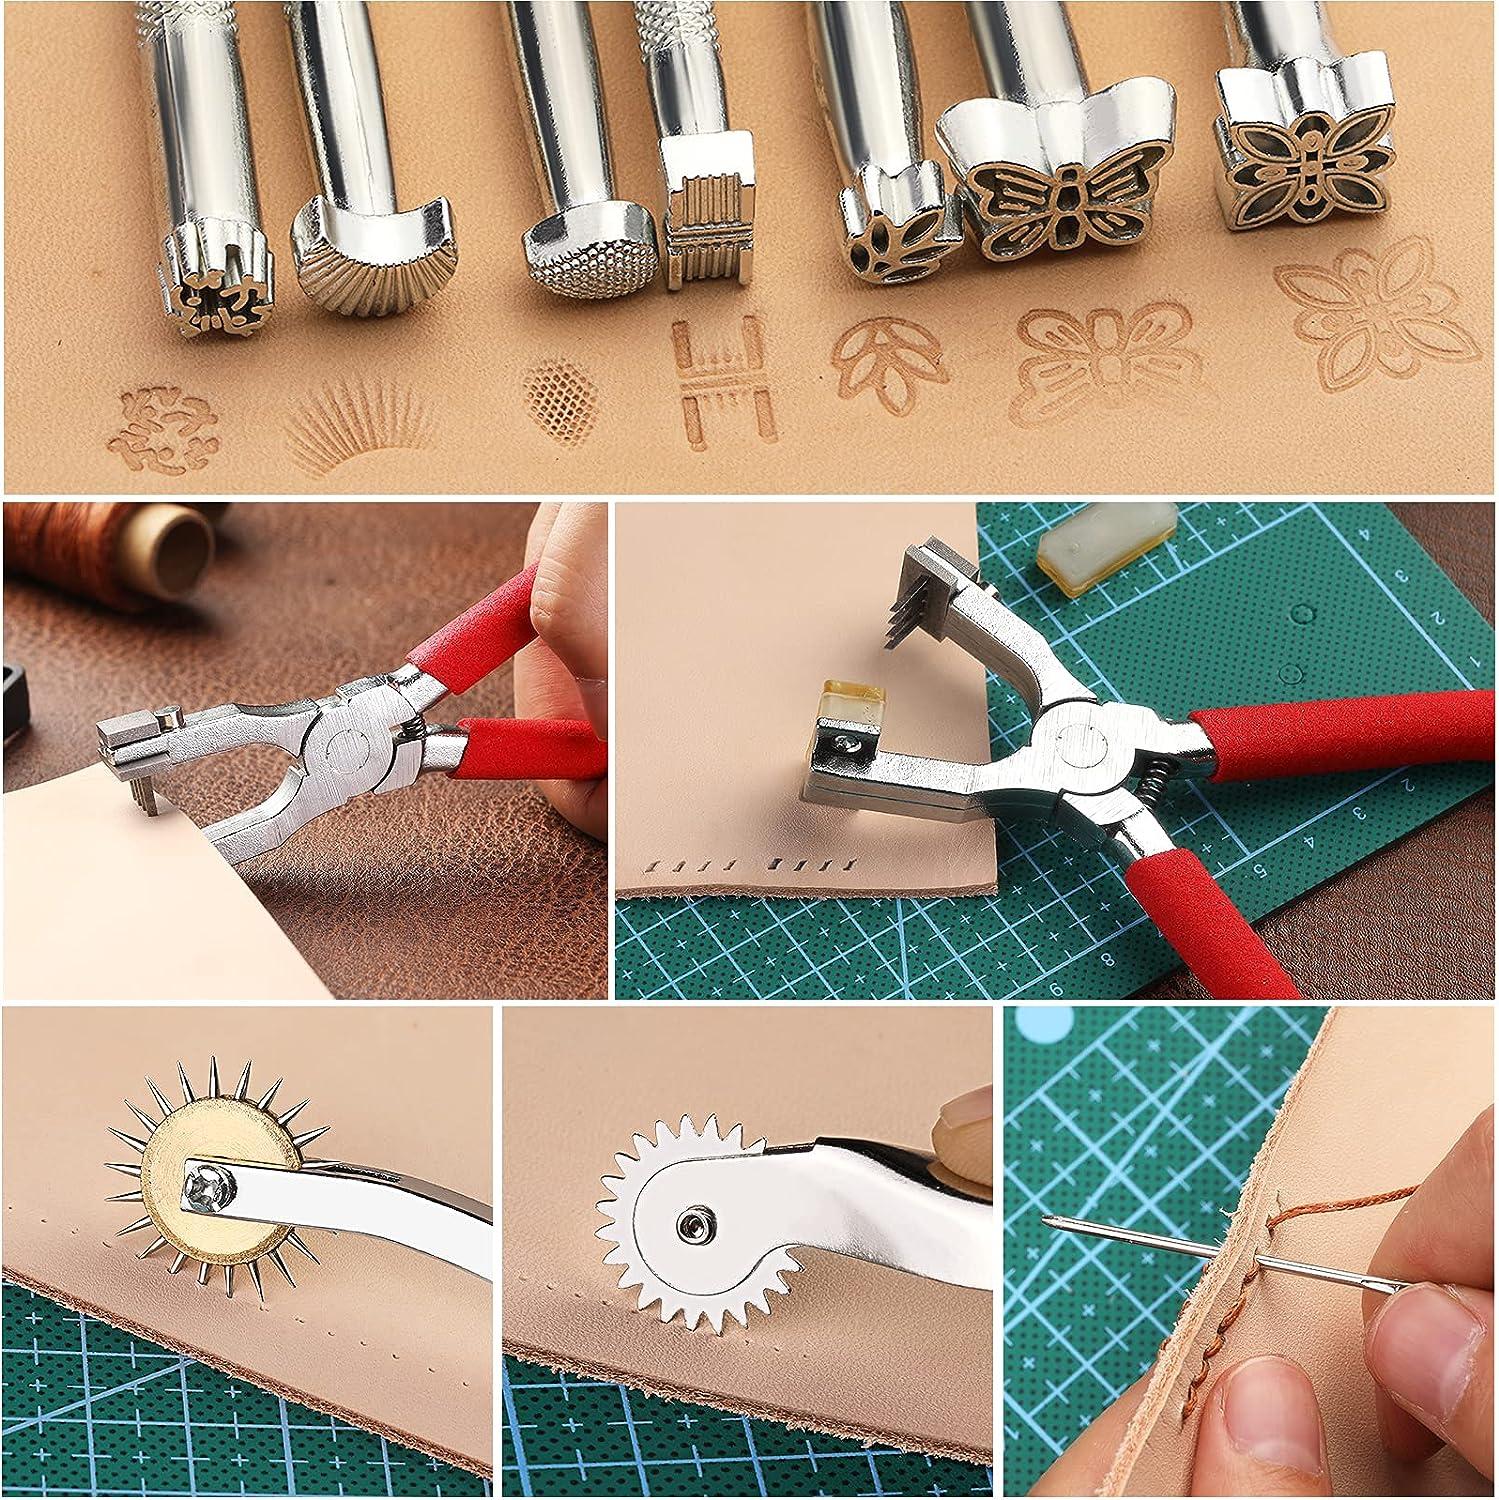 Leather Working Tools Leather Craft Kits Leather Sewing Tools with